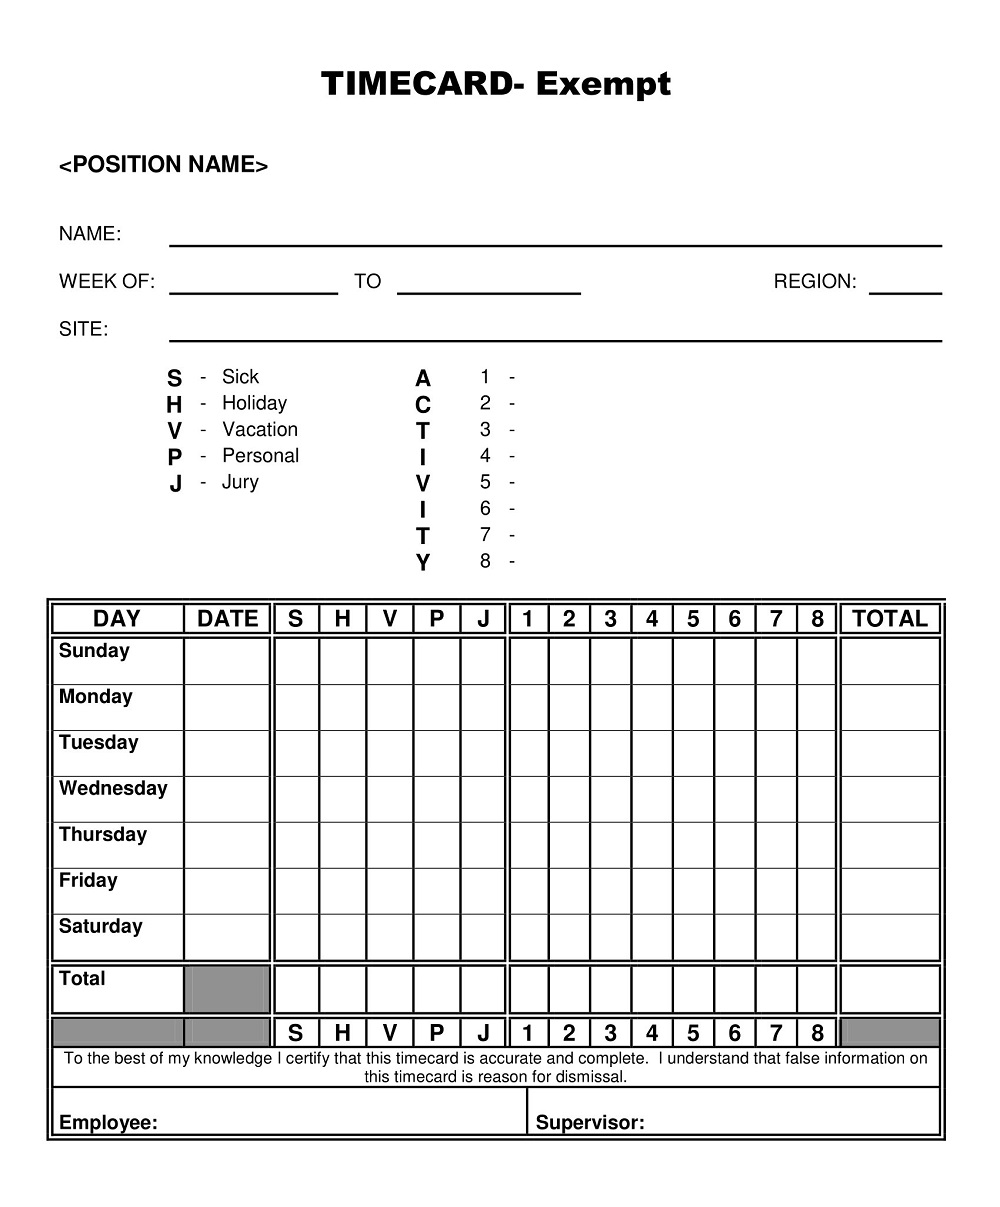 Exempt Time Card Template